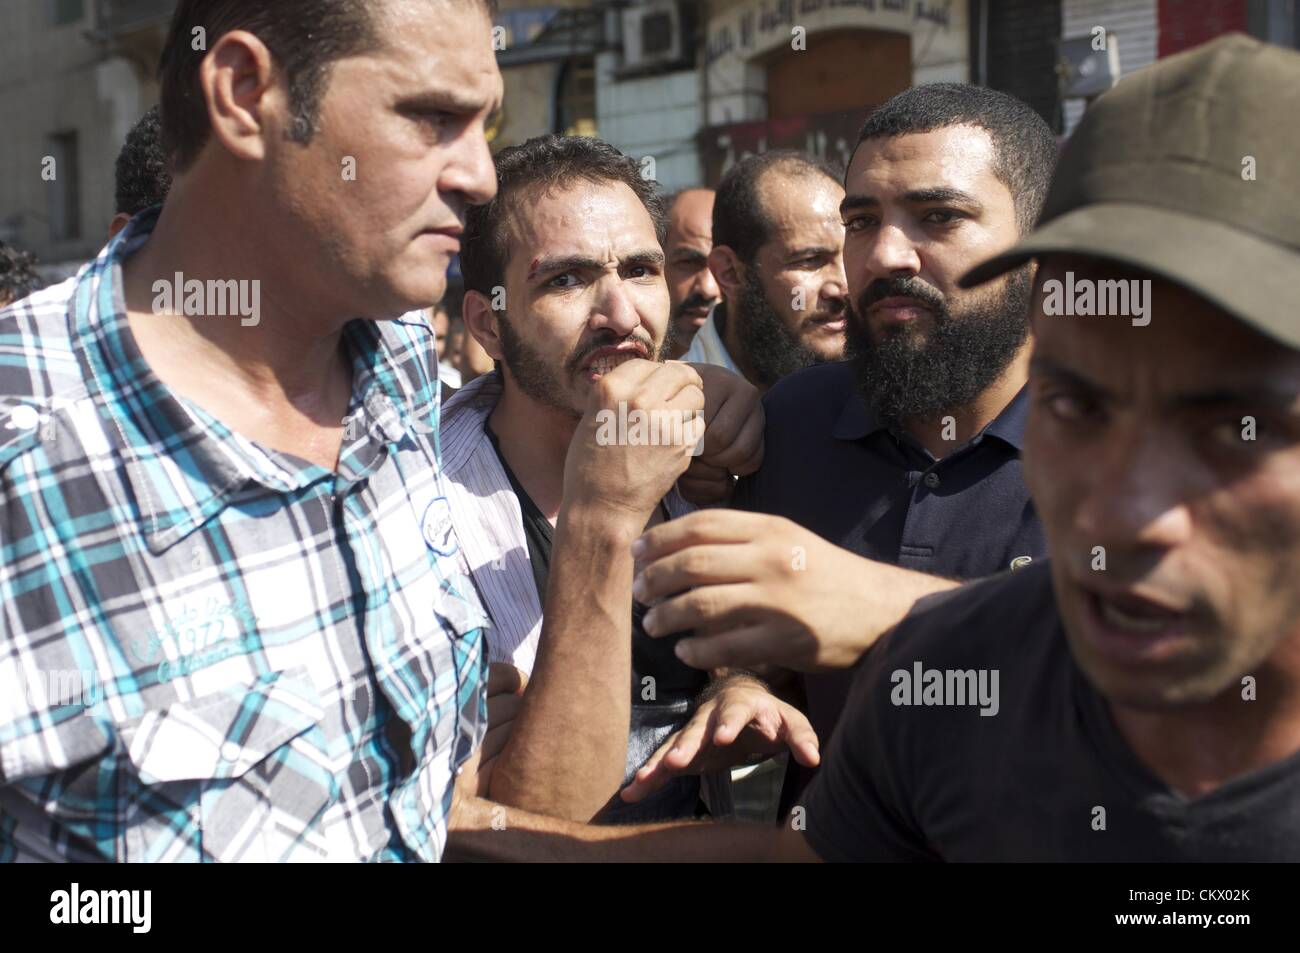 Aug. 24, 2012 - Cairo, Egypt - A man is cared for as supporters and opponents of Egyptian President's Muslim Brotherhood Government clash in downtown Cairo. Anti-Muslim Brotherhood protesters called for a second revolution and plan protests in several areas of the city. (Credit Image: © Cliff Cheney/ZUMAPRESS.com/Alamy Live News) Stock Photo